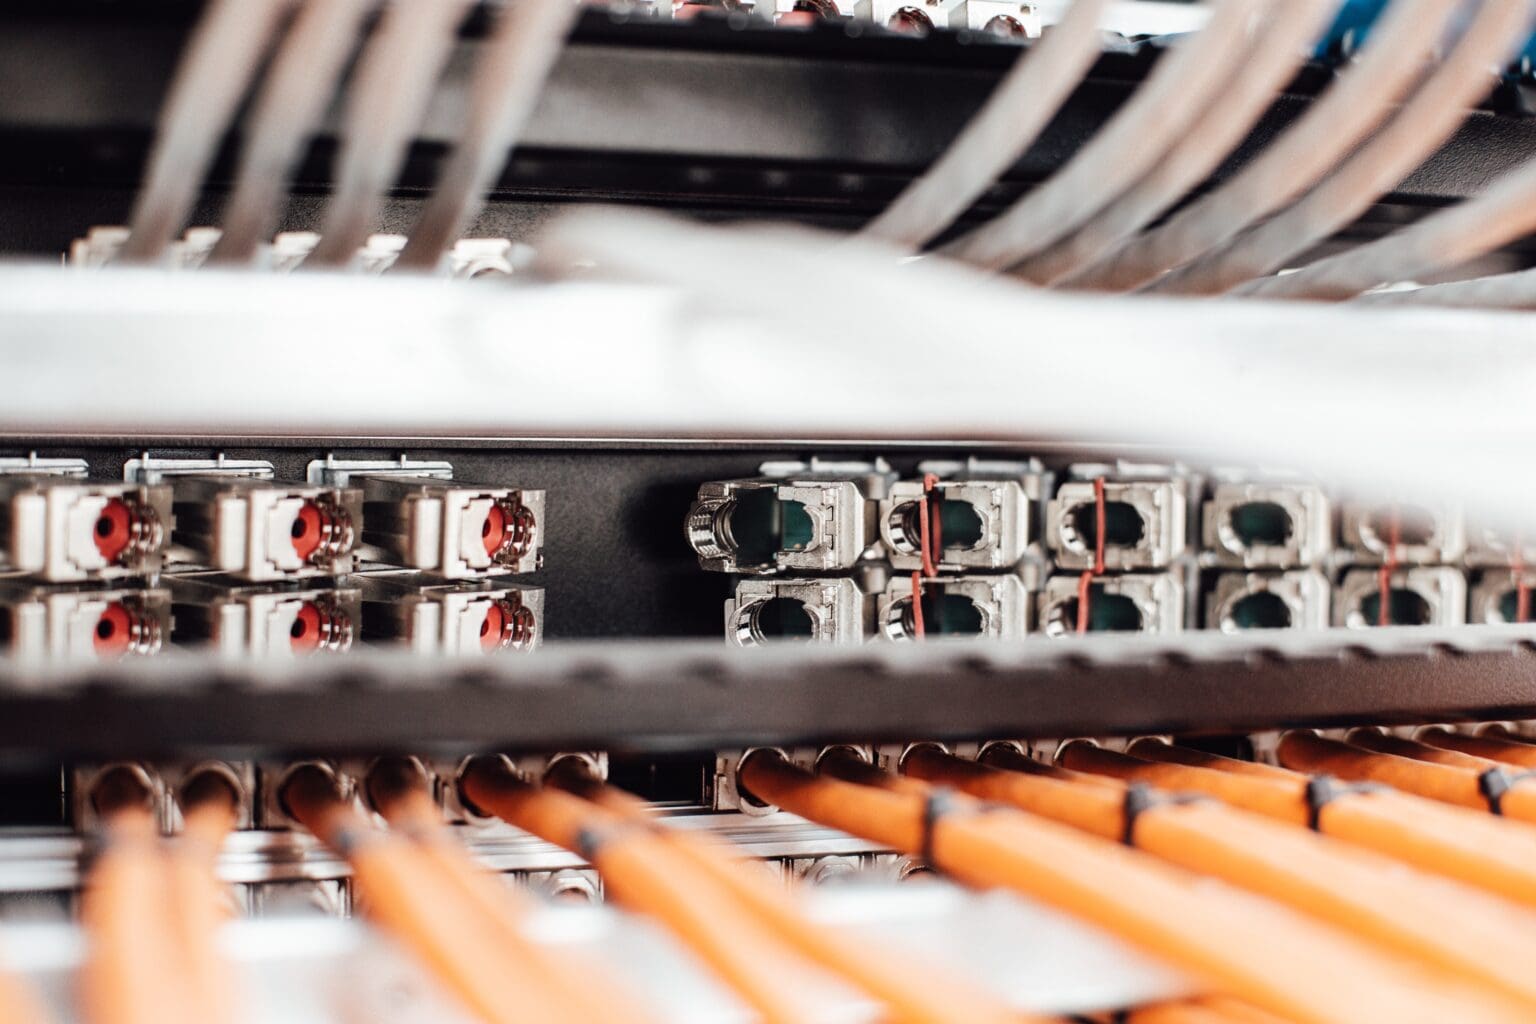 Close-up view of network cables and switches in a server rack, highlighting the intricacies of network connections and data communication hardware.